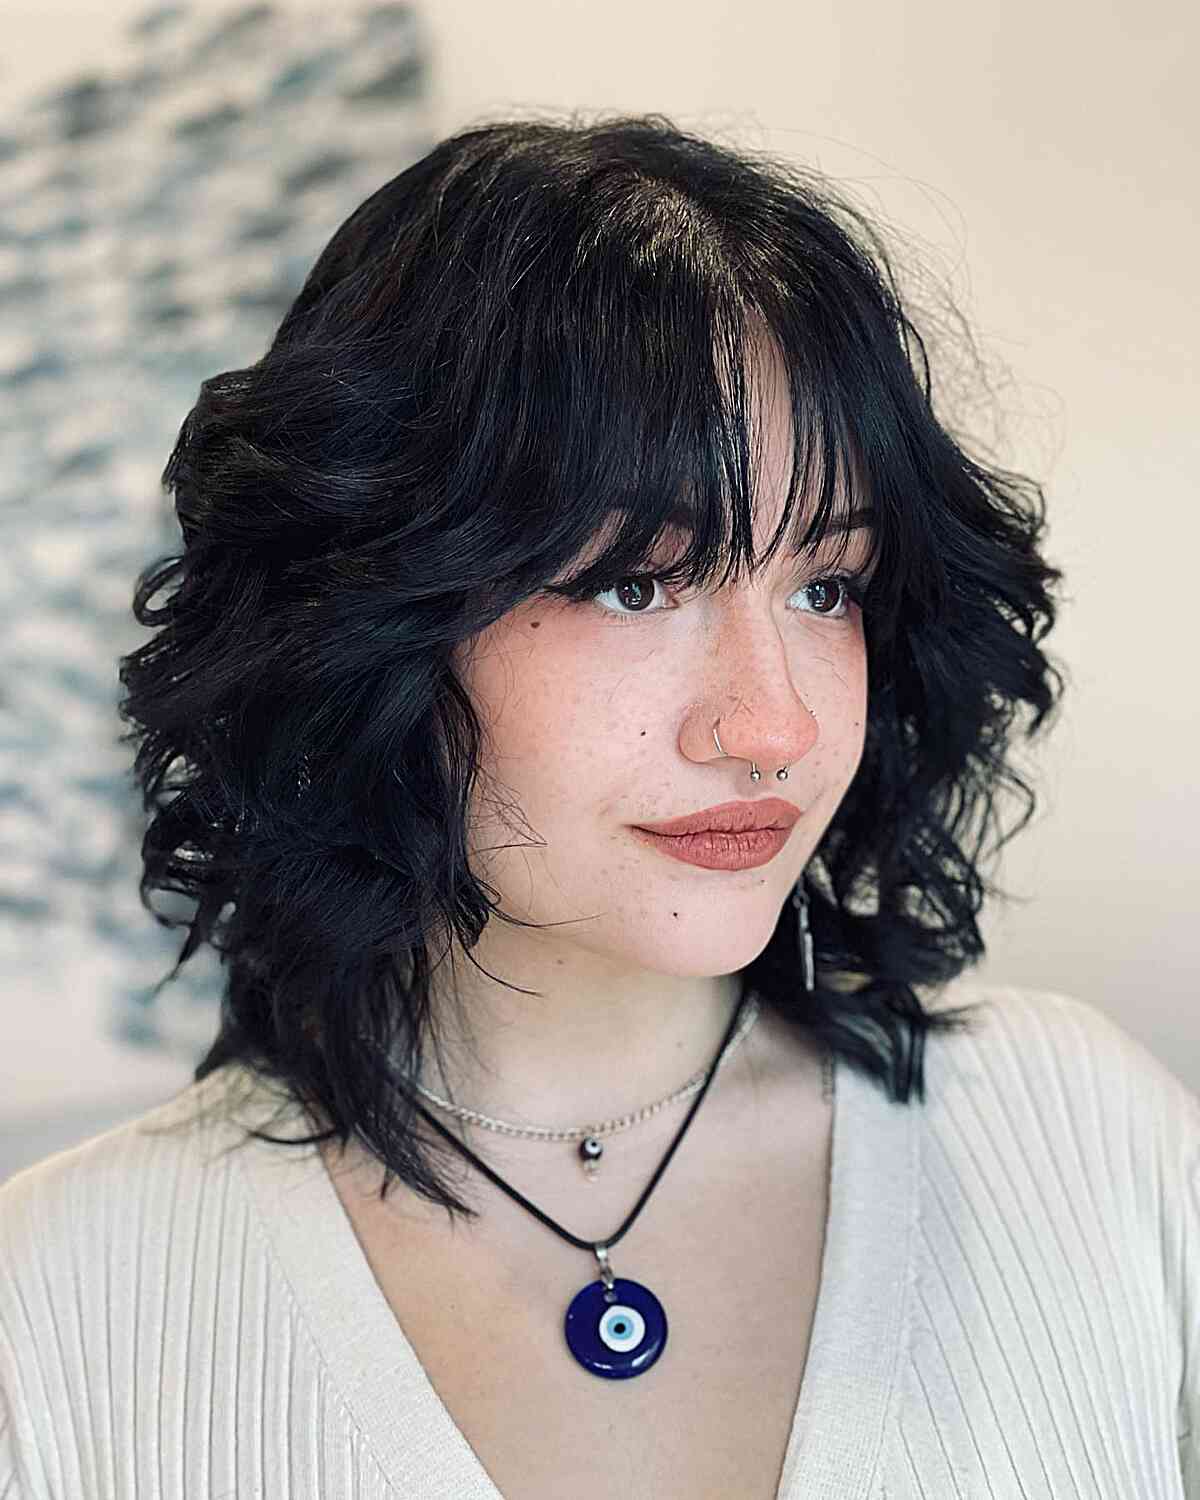 Jet Black Wavy Shaggy Wolf Cut with See-Through Bangs for Shoulder-length hair